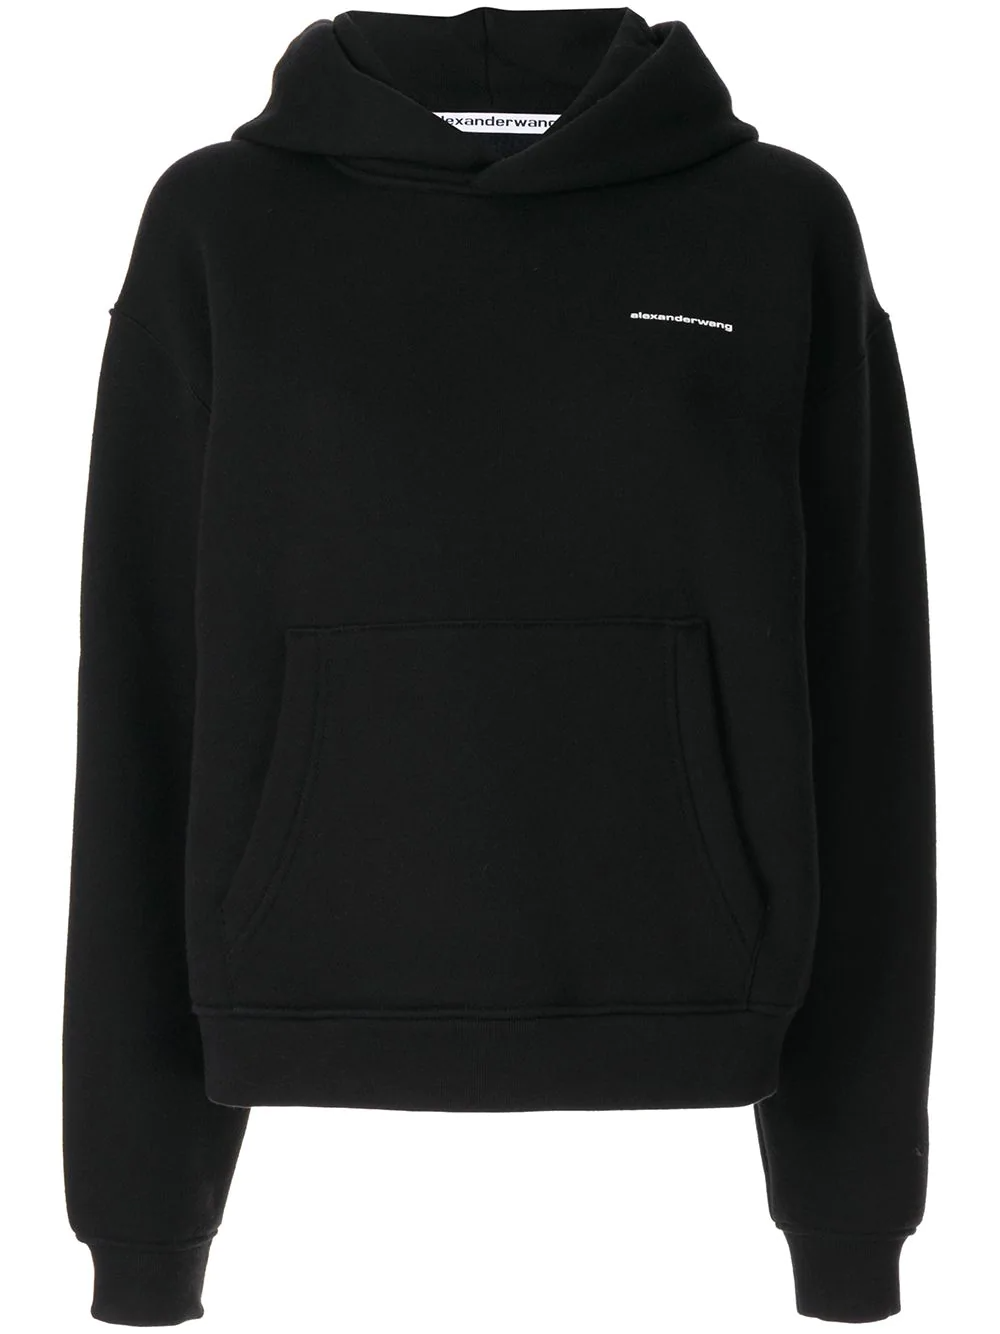 Alexander Wang loose-fit Logo Hoodie - Farfetch -   18 fitness Clothes loose ideas